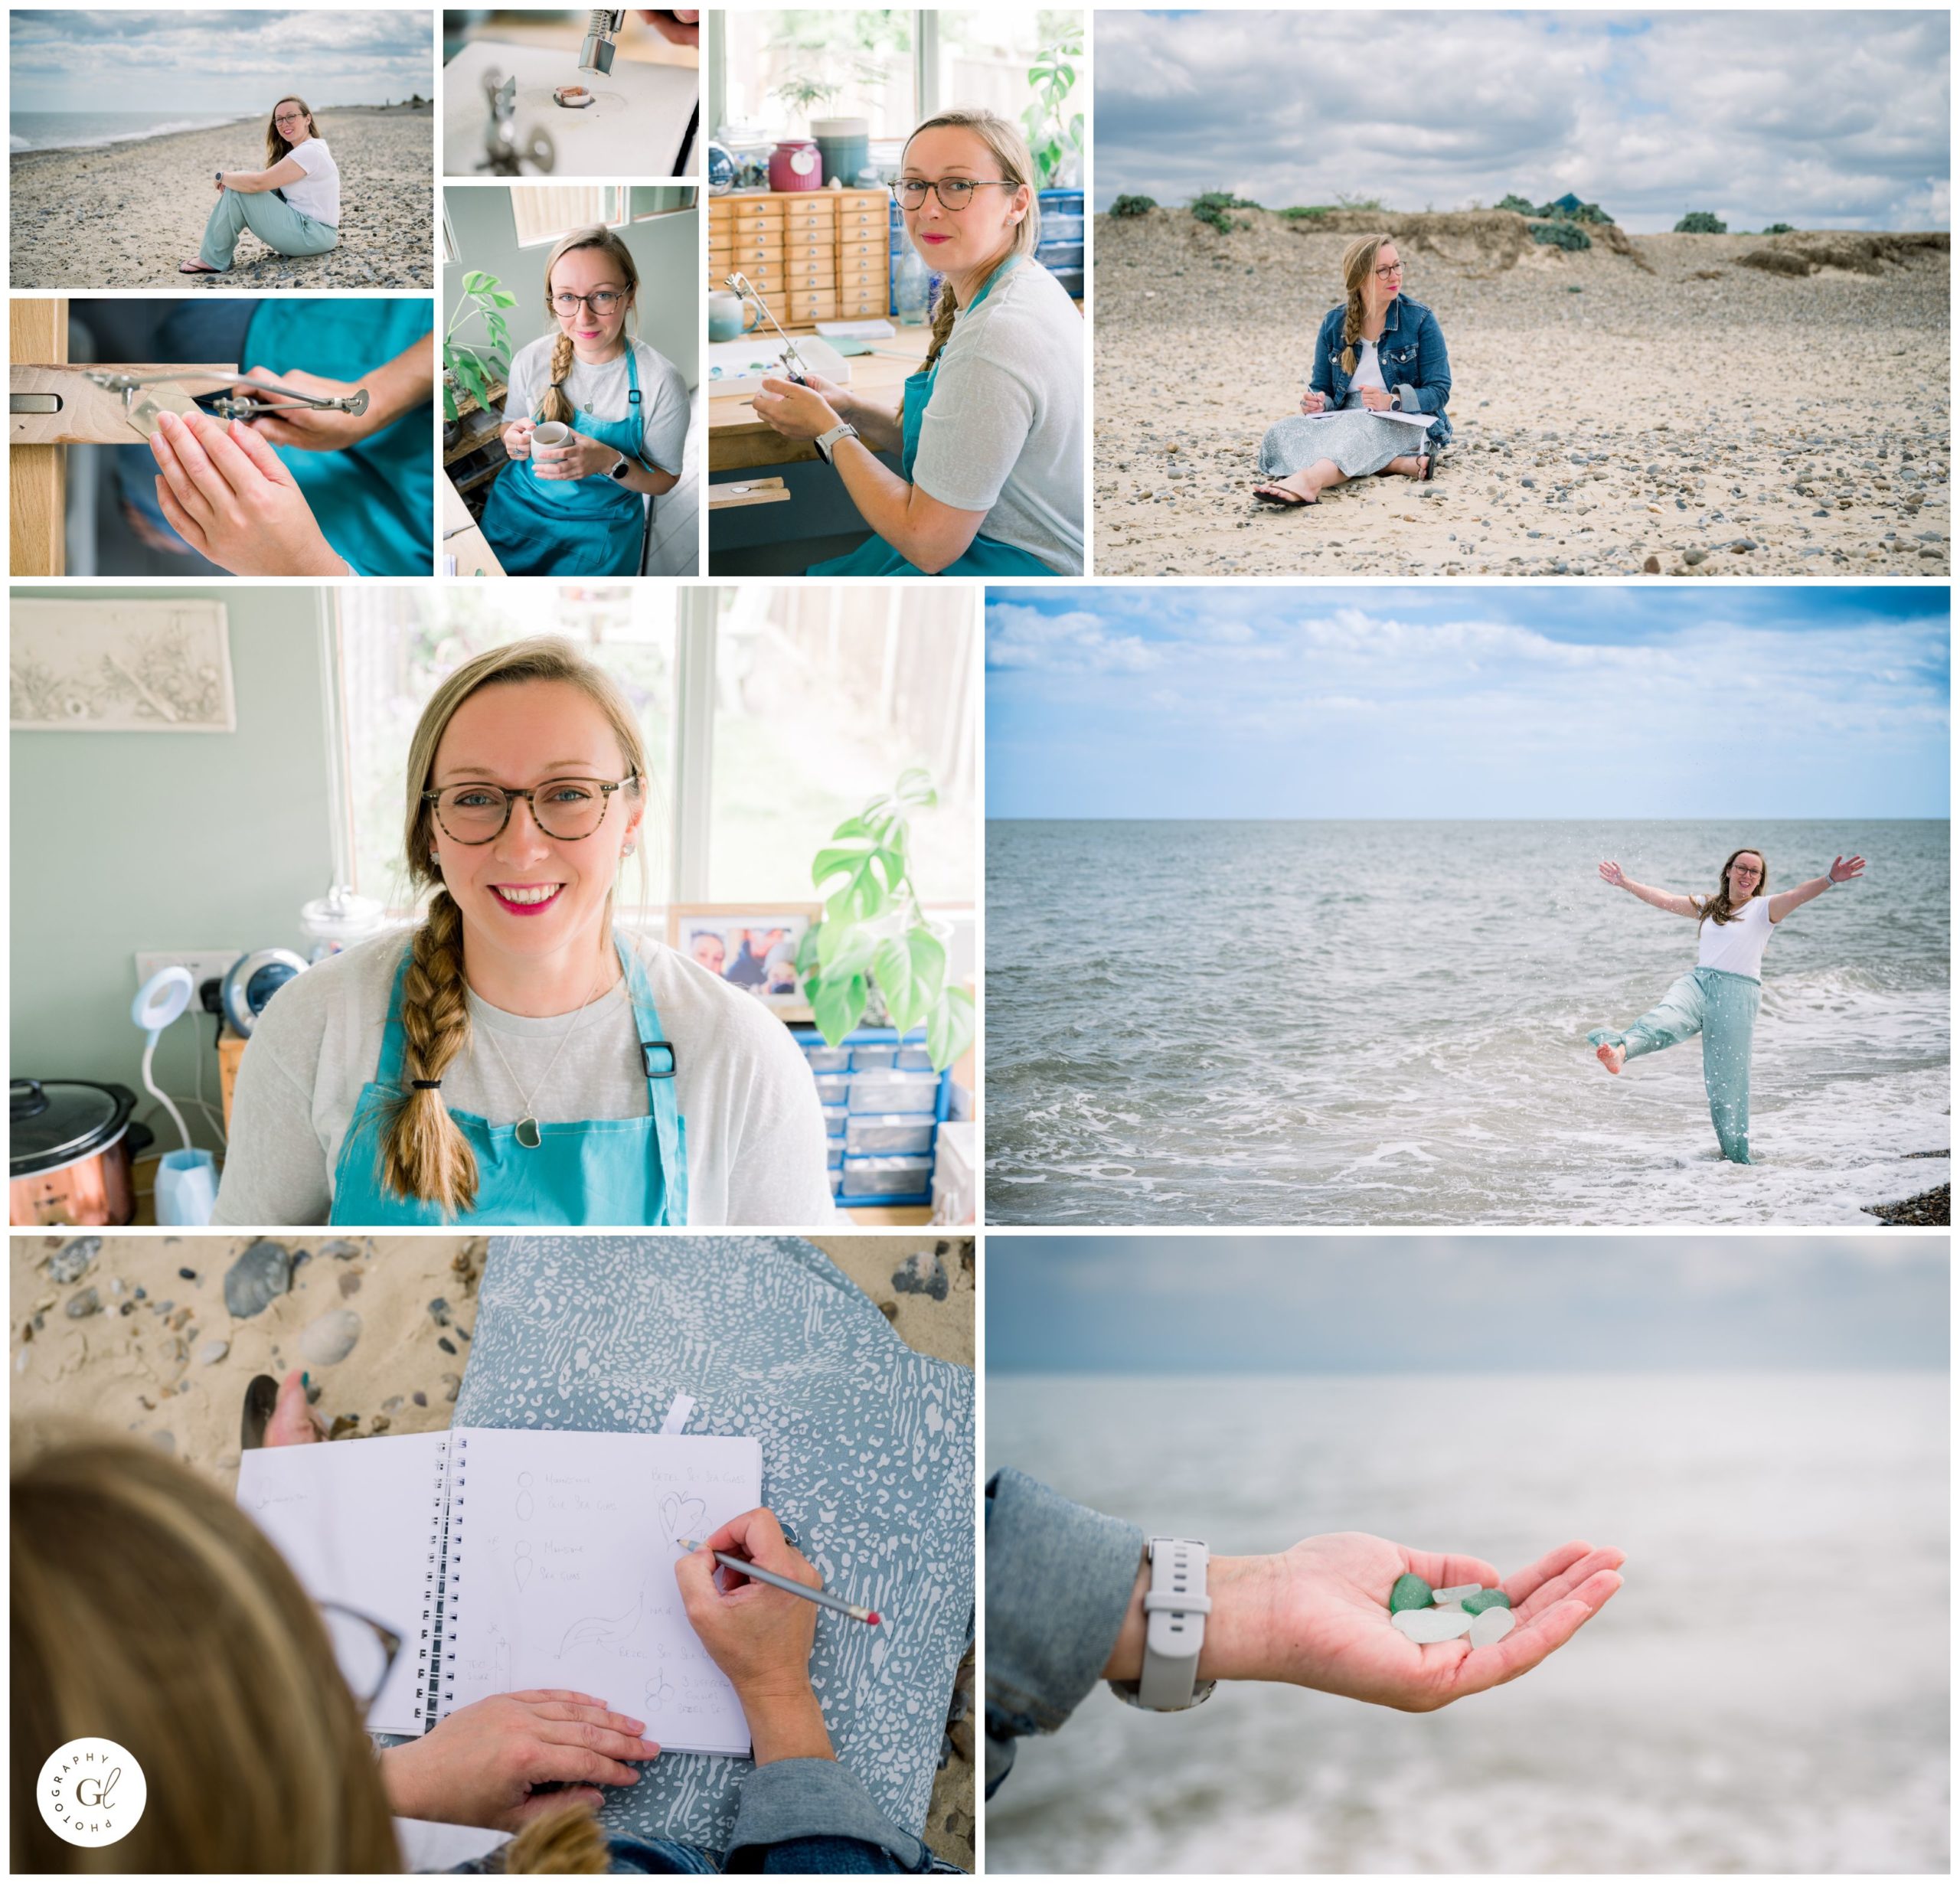 Collage of smiling woman in her jewellery workshop and also on the beach